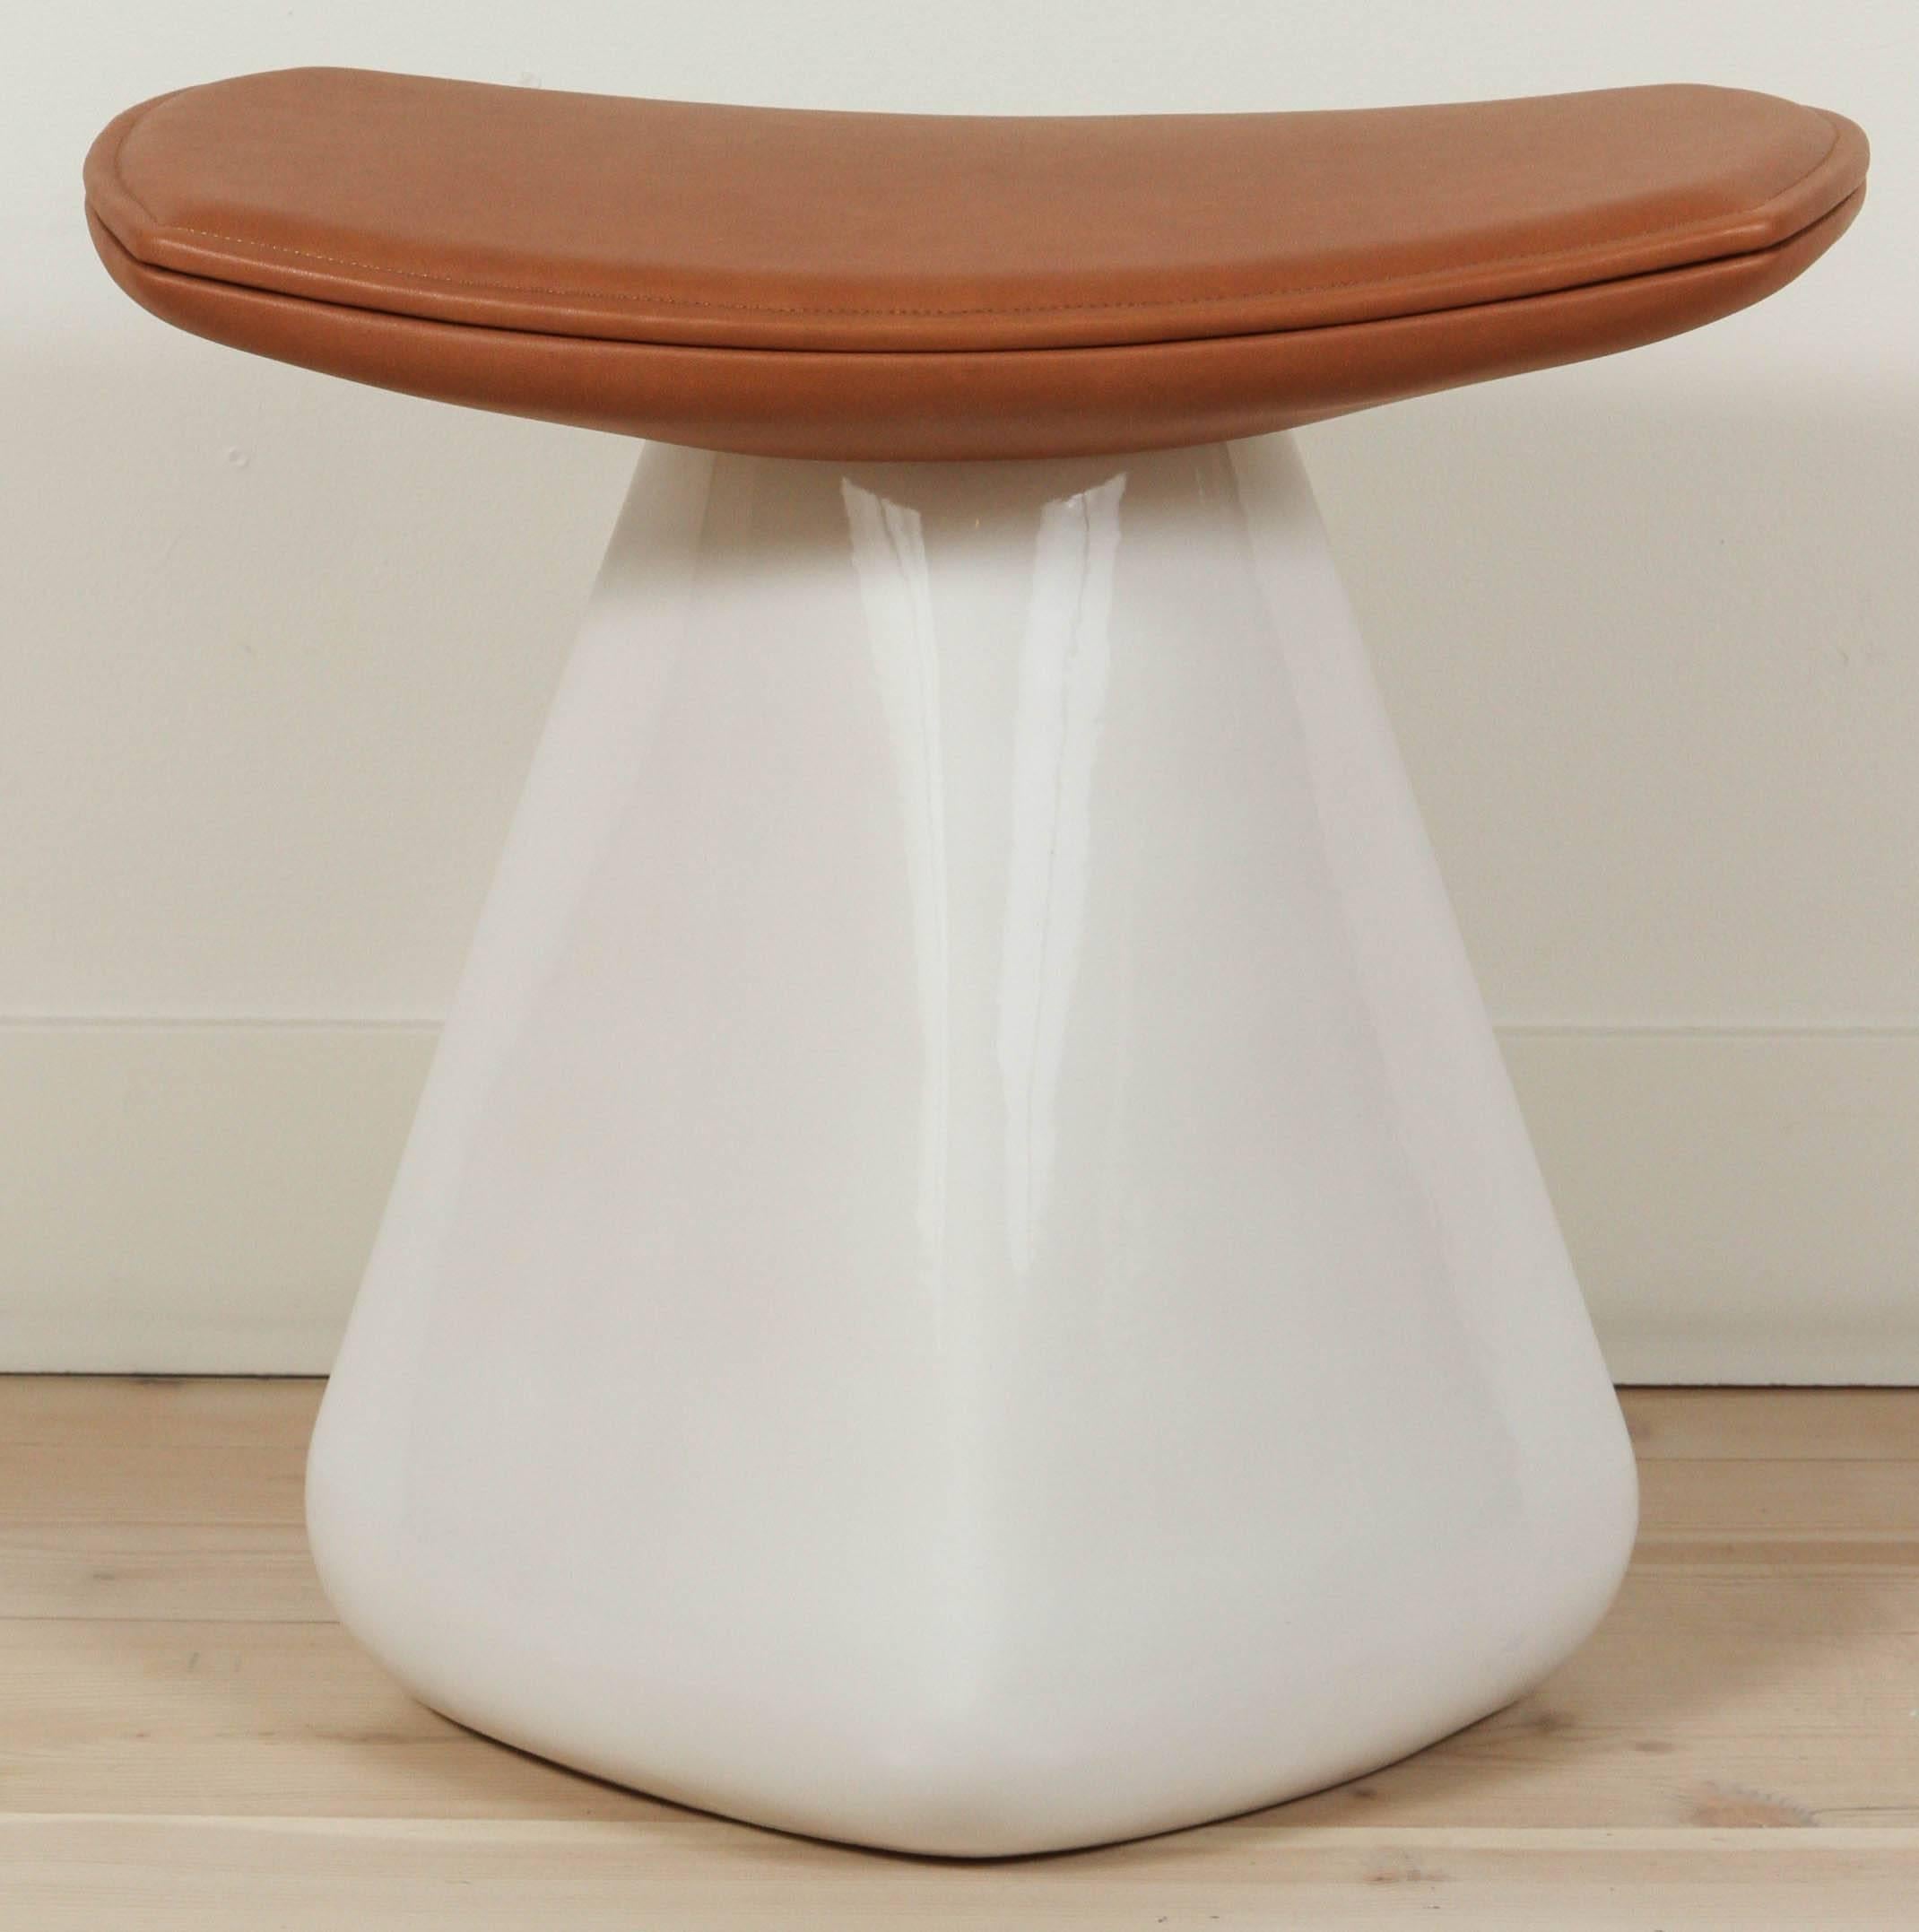 Dam stool by Collection Particulière.